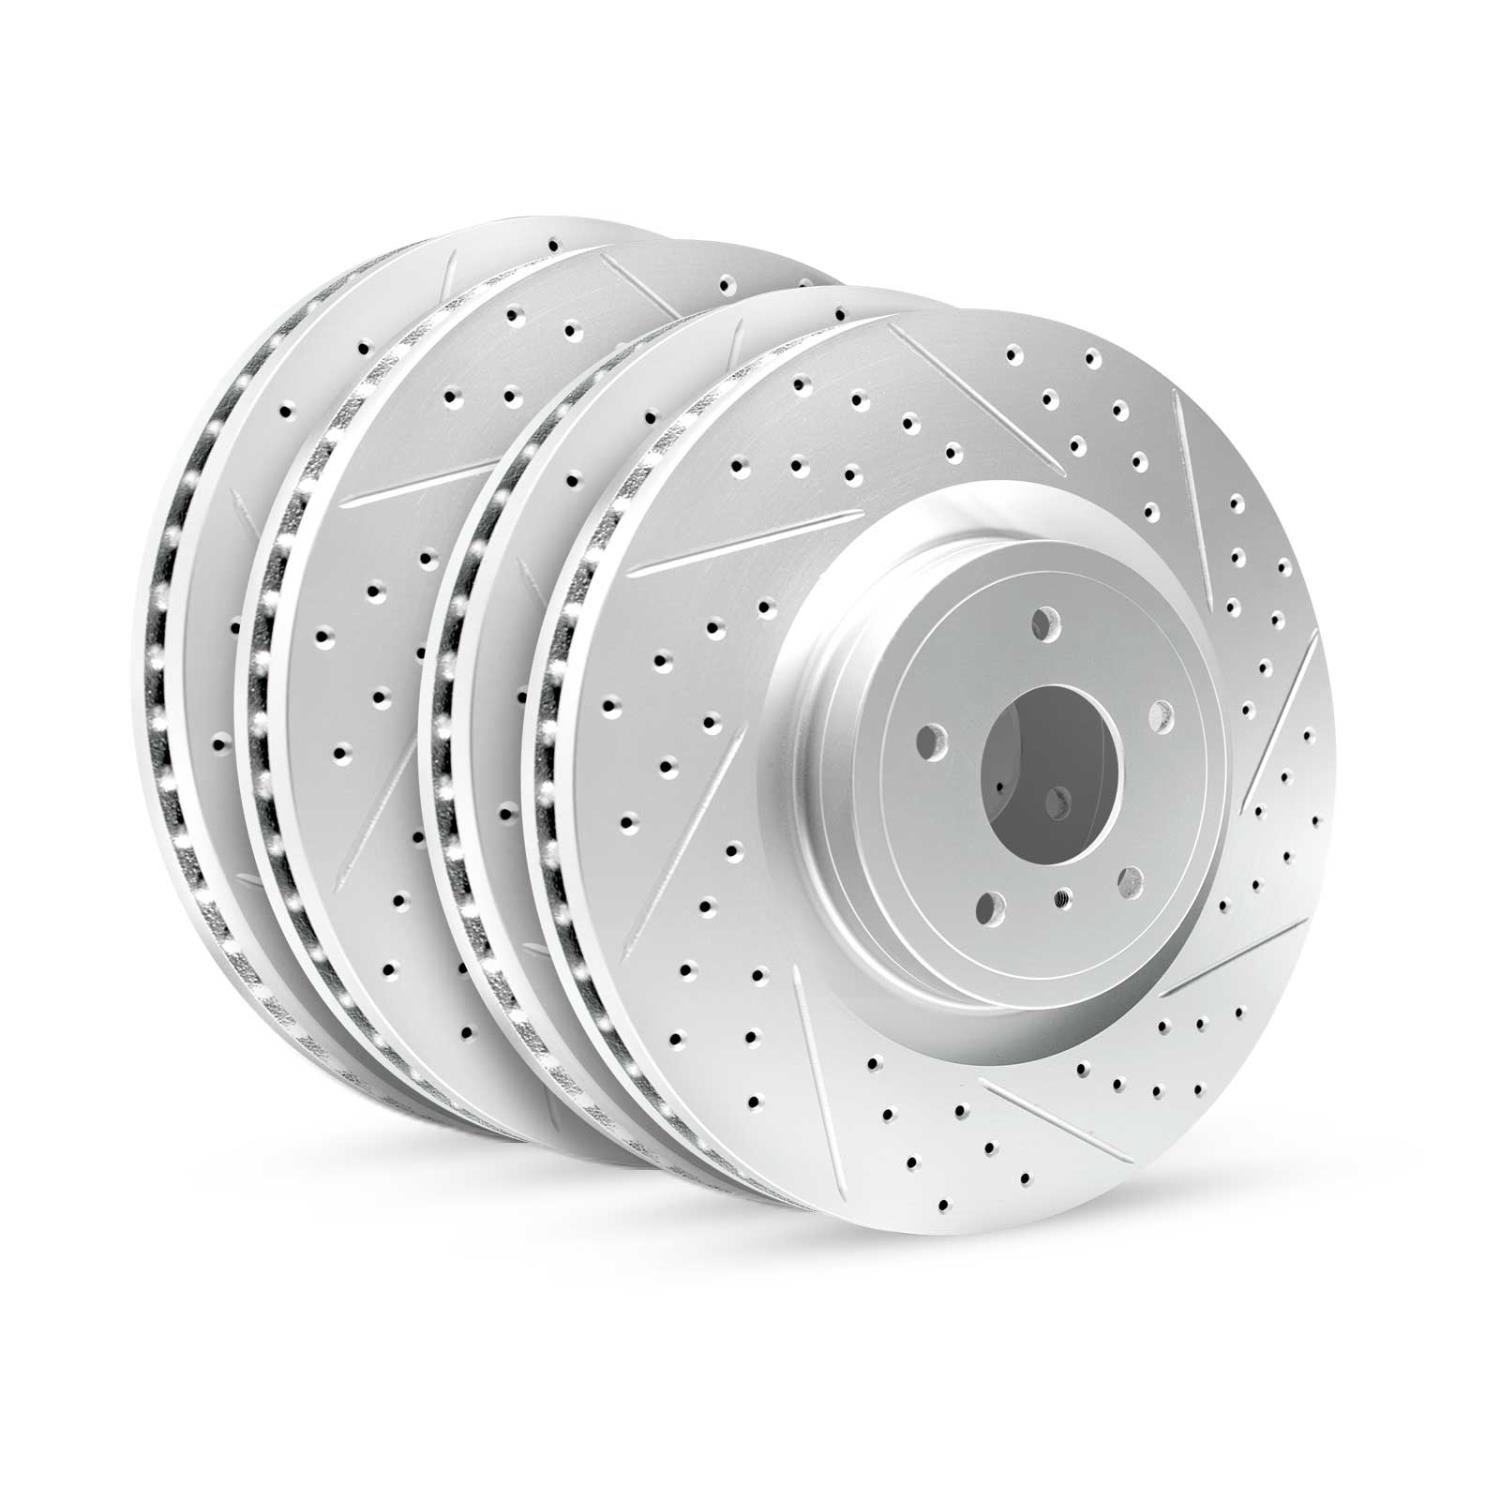 GEO-Carbon Drilled/Slotted Rotors, 2001-2006 BMW, Position: Front/Rear